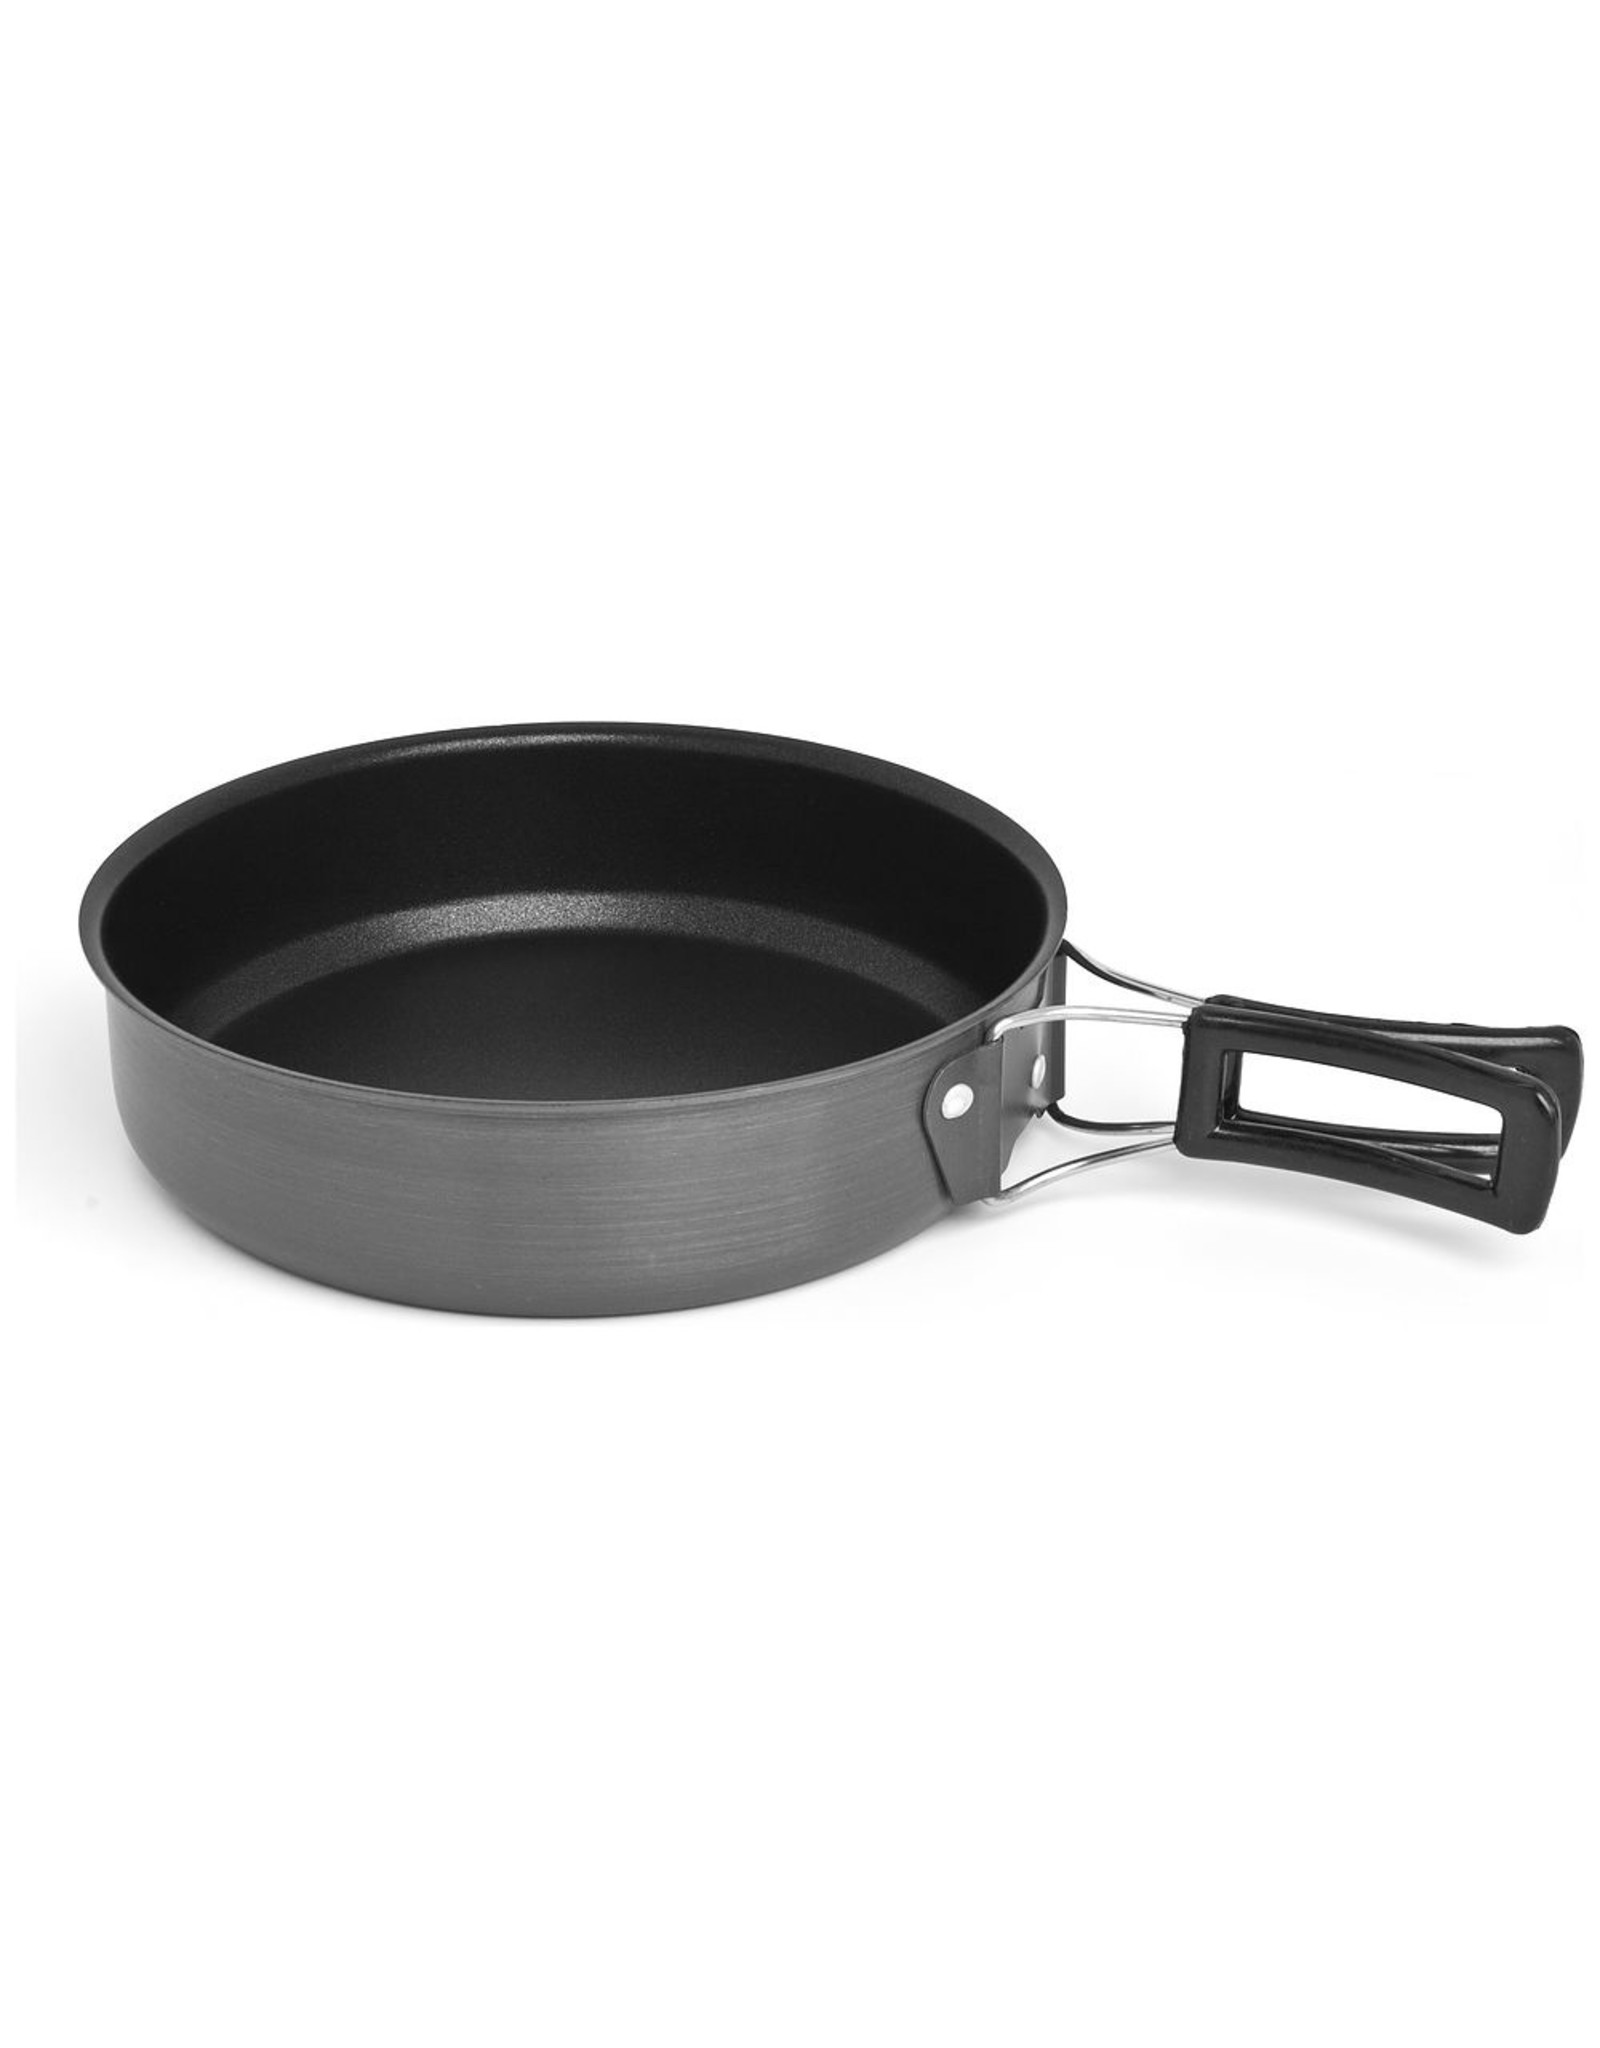 CHINOOK TECHNICAL OUTDOOR CHINOOK HARD ANODIZED FRYING PAN 8.5